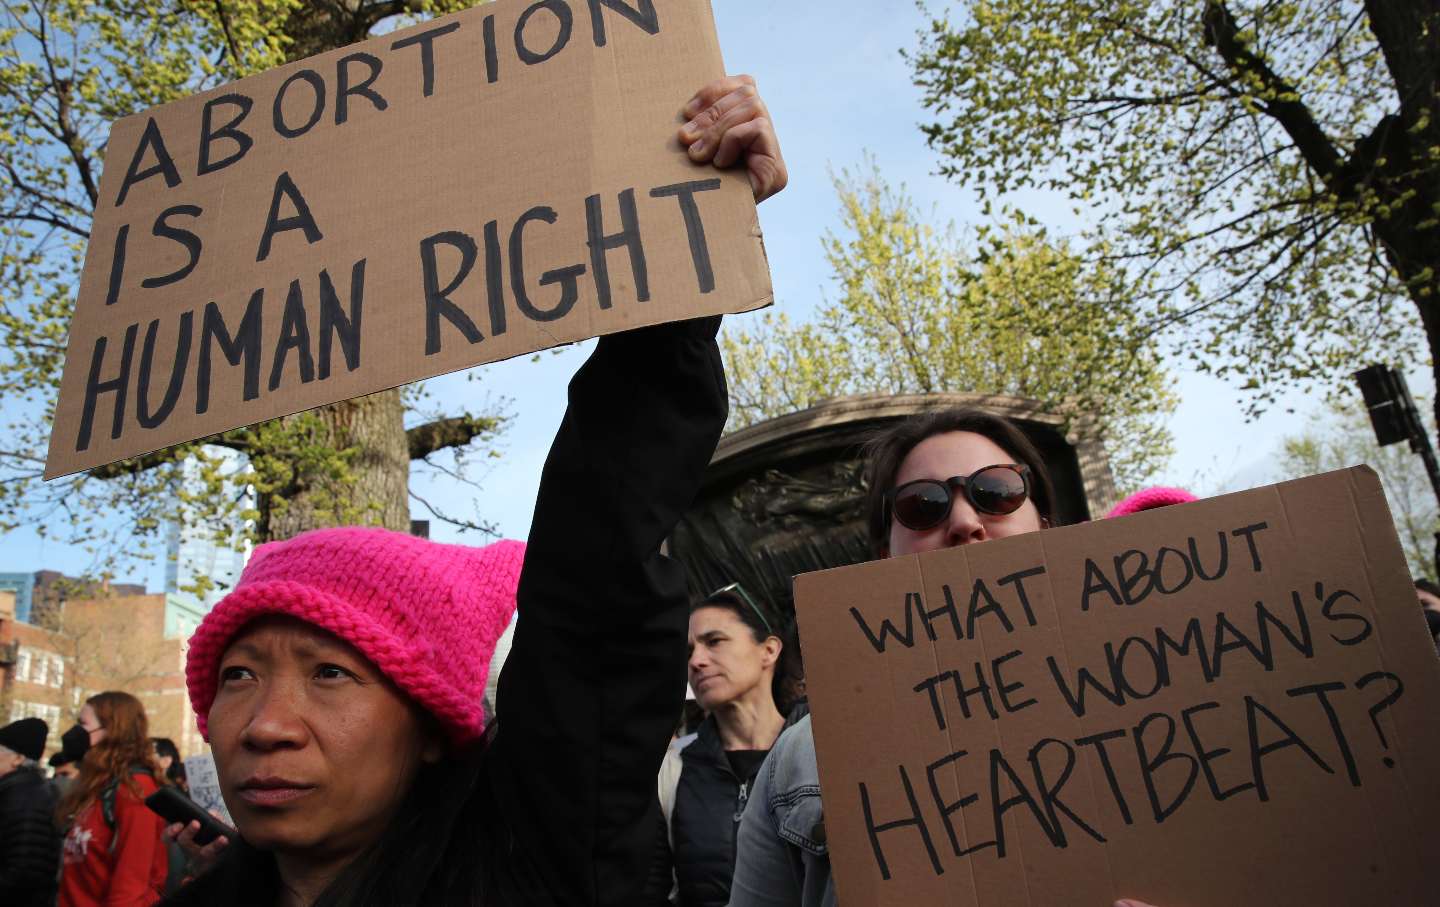 Protesters in Boston hold cardboard signs in support of abortion, one reads 